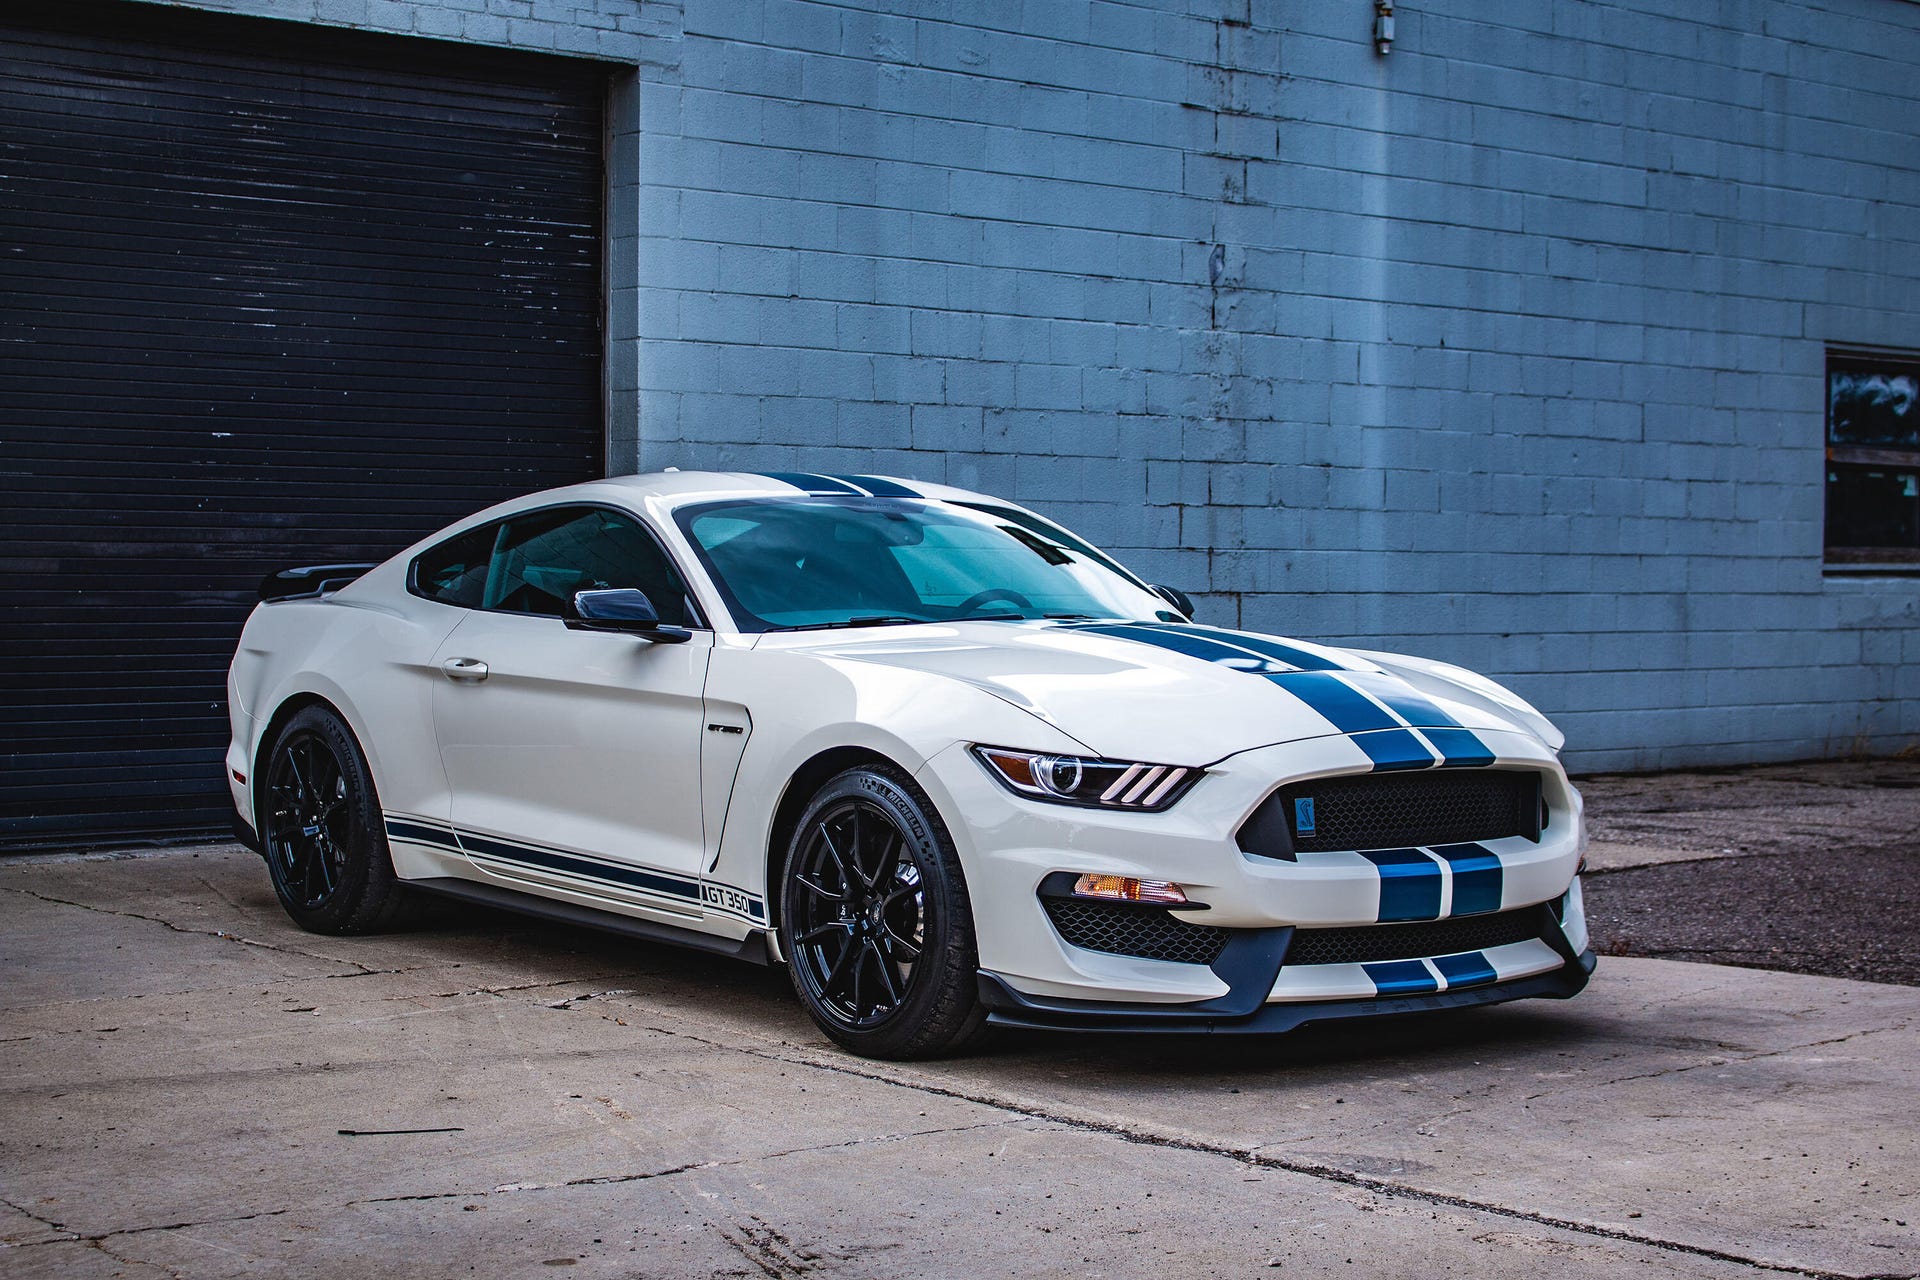 2020 Ford Mustang Shelby GT350 Heritage Edition first drive review: A slick  nod to the past - CNET